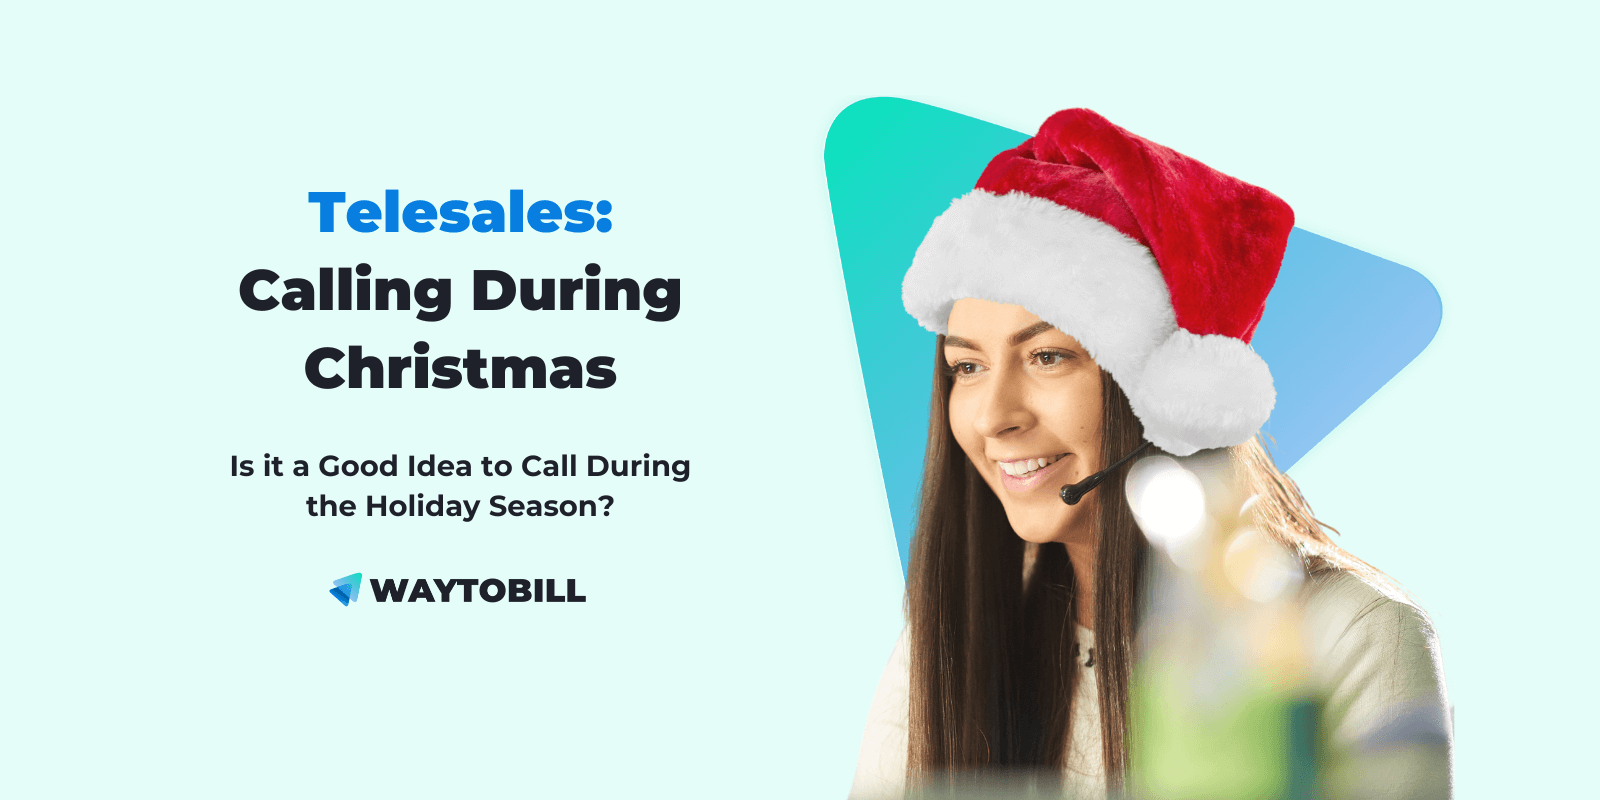 Telesales and Calling During Christmas – Is It a Good Idea?